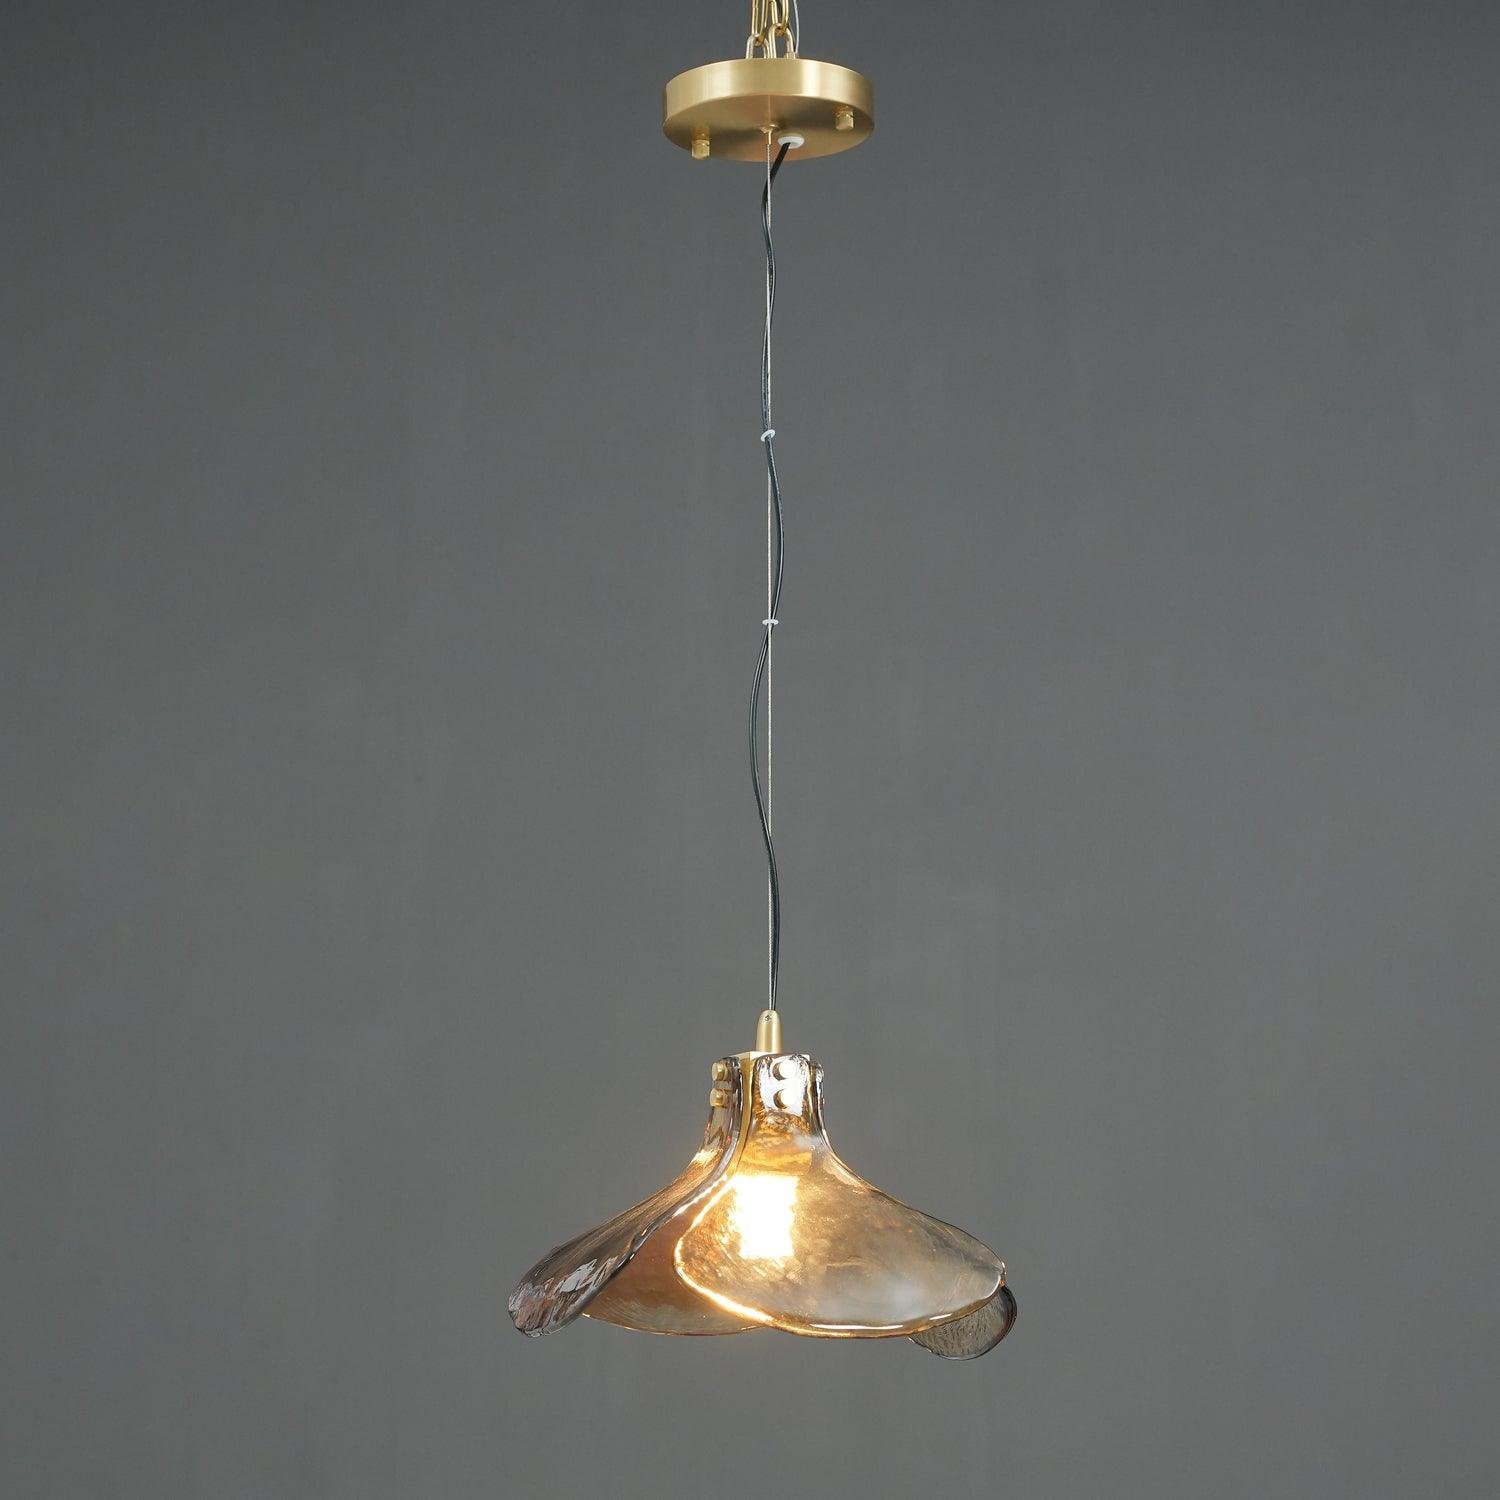 Brown LS185 Pendant Lamp with a diameter of 15.7 inches and a height of 11 inches (40cm x 28cm)